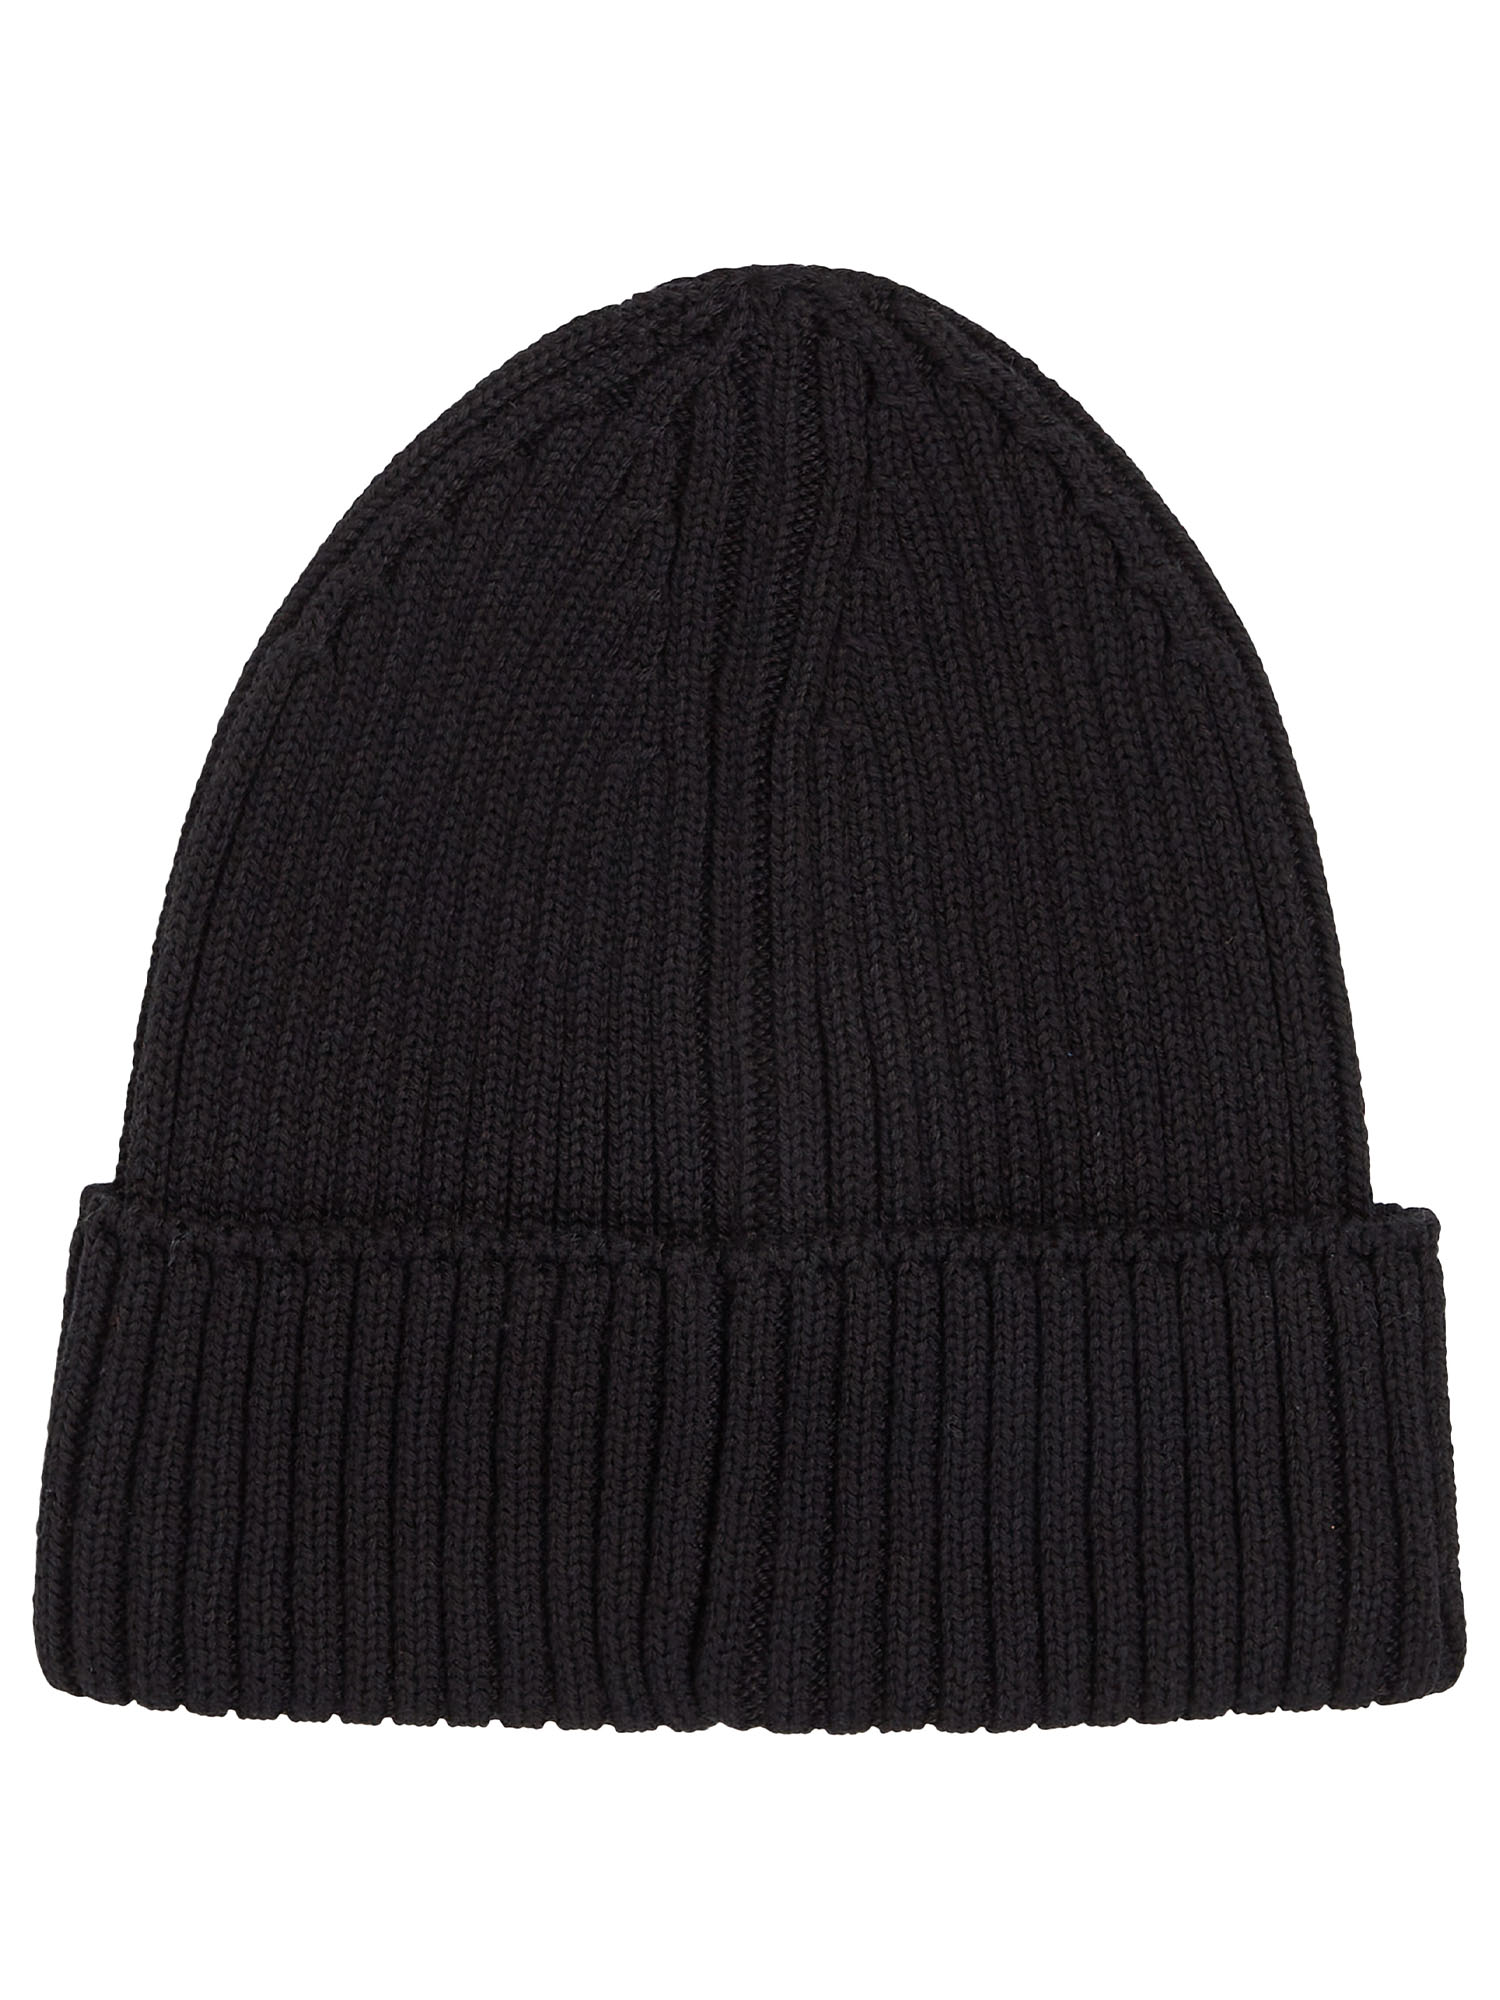 CAPPELLO A COSTE TOMMY JEANS - NERO